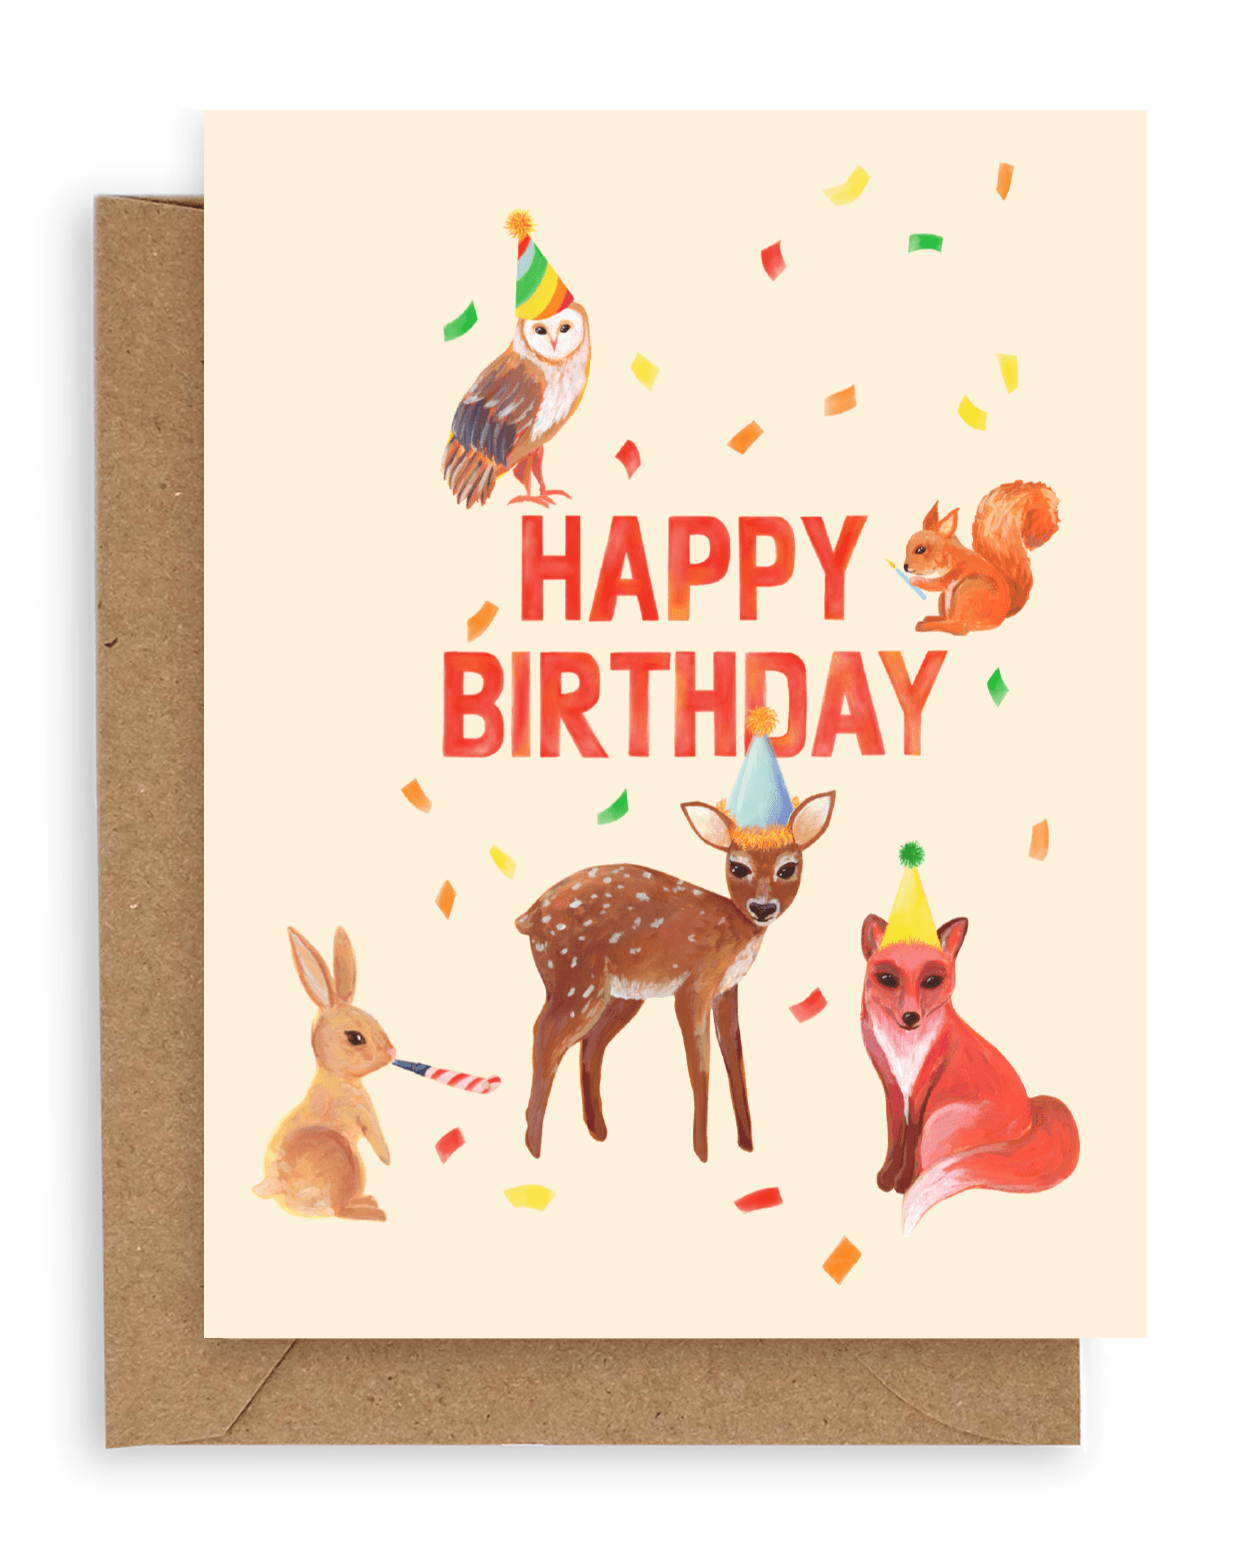 Forest creatures design with confetti, an owl, fox, fawn, rabbit, and squirrel in birthday hats surrounding the words "happy birthday" in red printed on a cream colored background. Shown with kraft envelope.